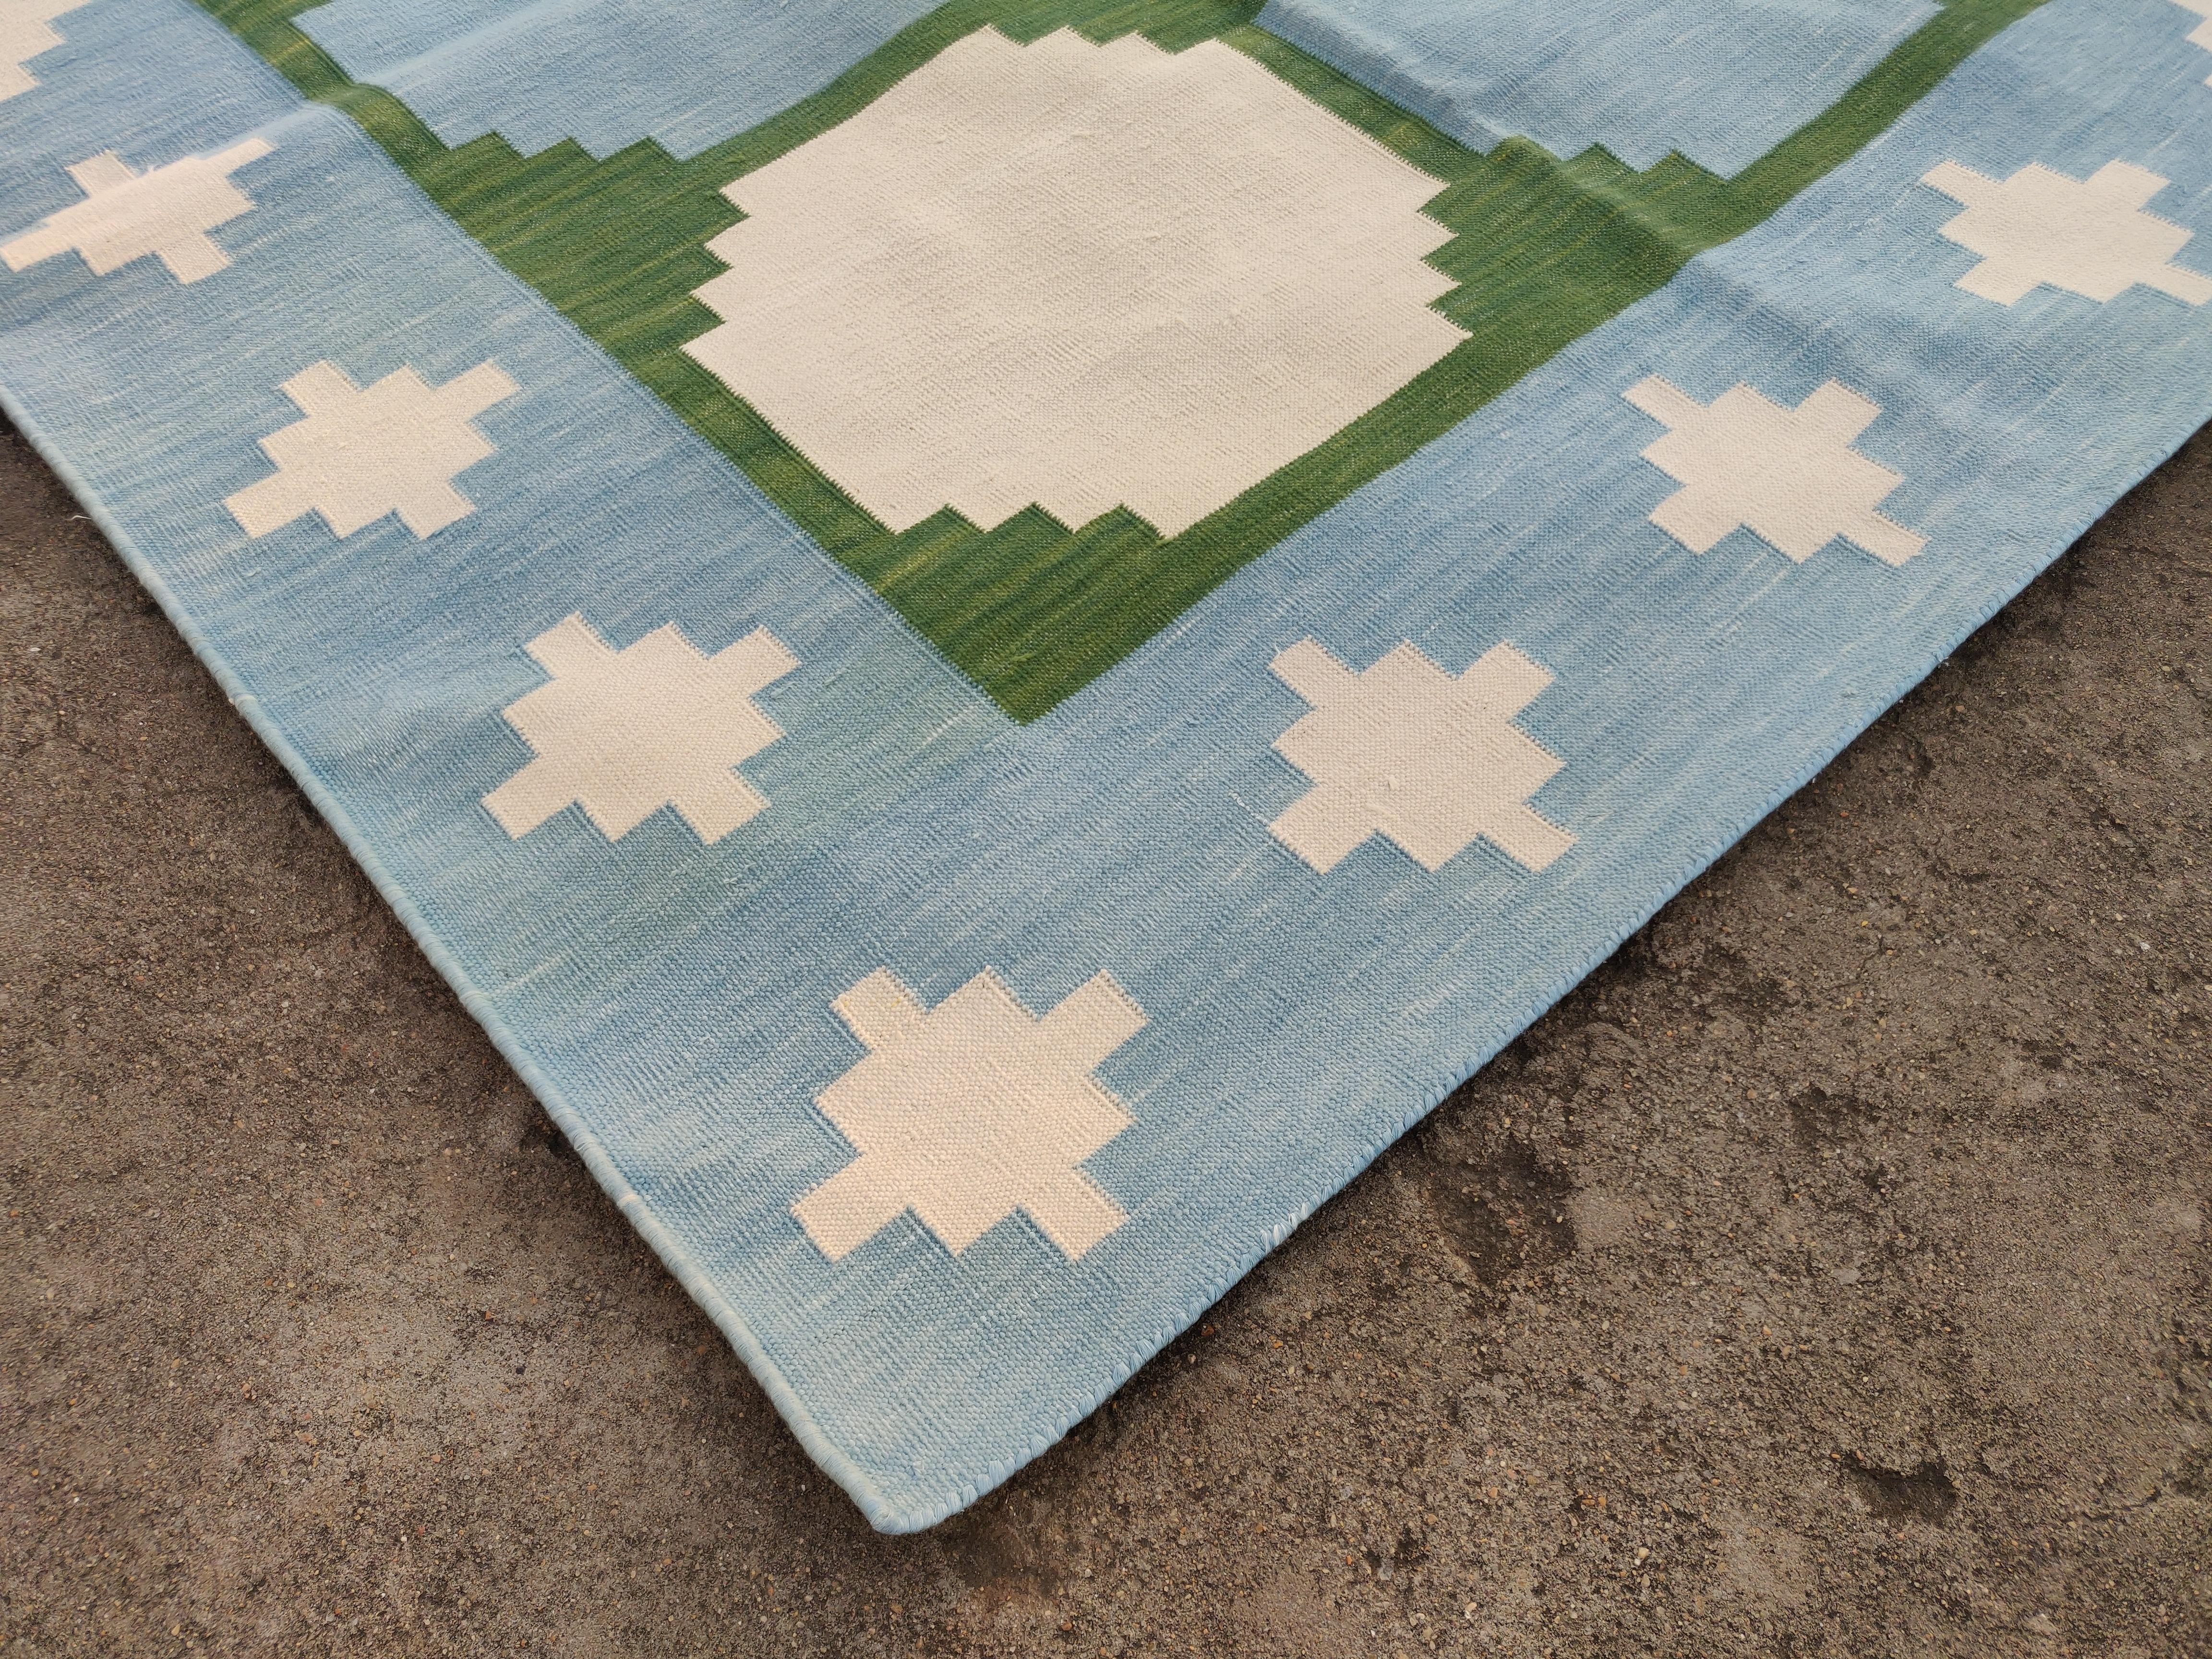 Hand-Woven Handmade Cotton Area Flat Weave Rug, Green & Blue Tile Patterned Indian Dhurrie For Sale